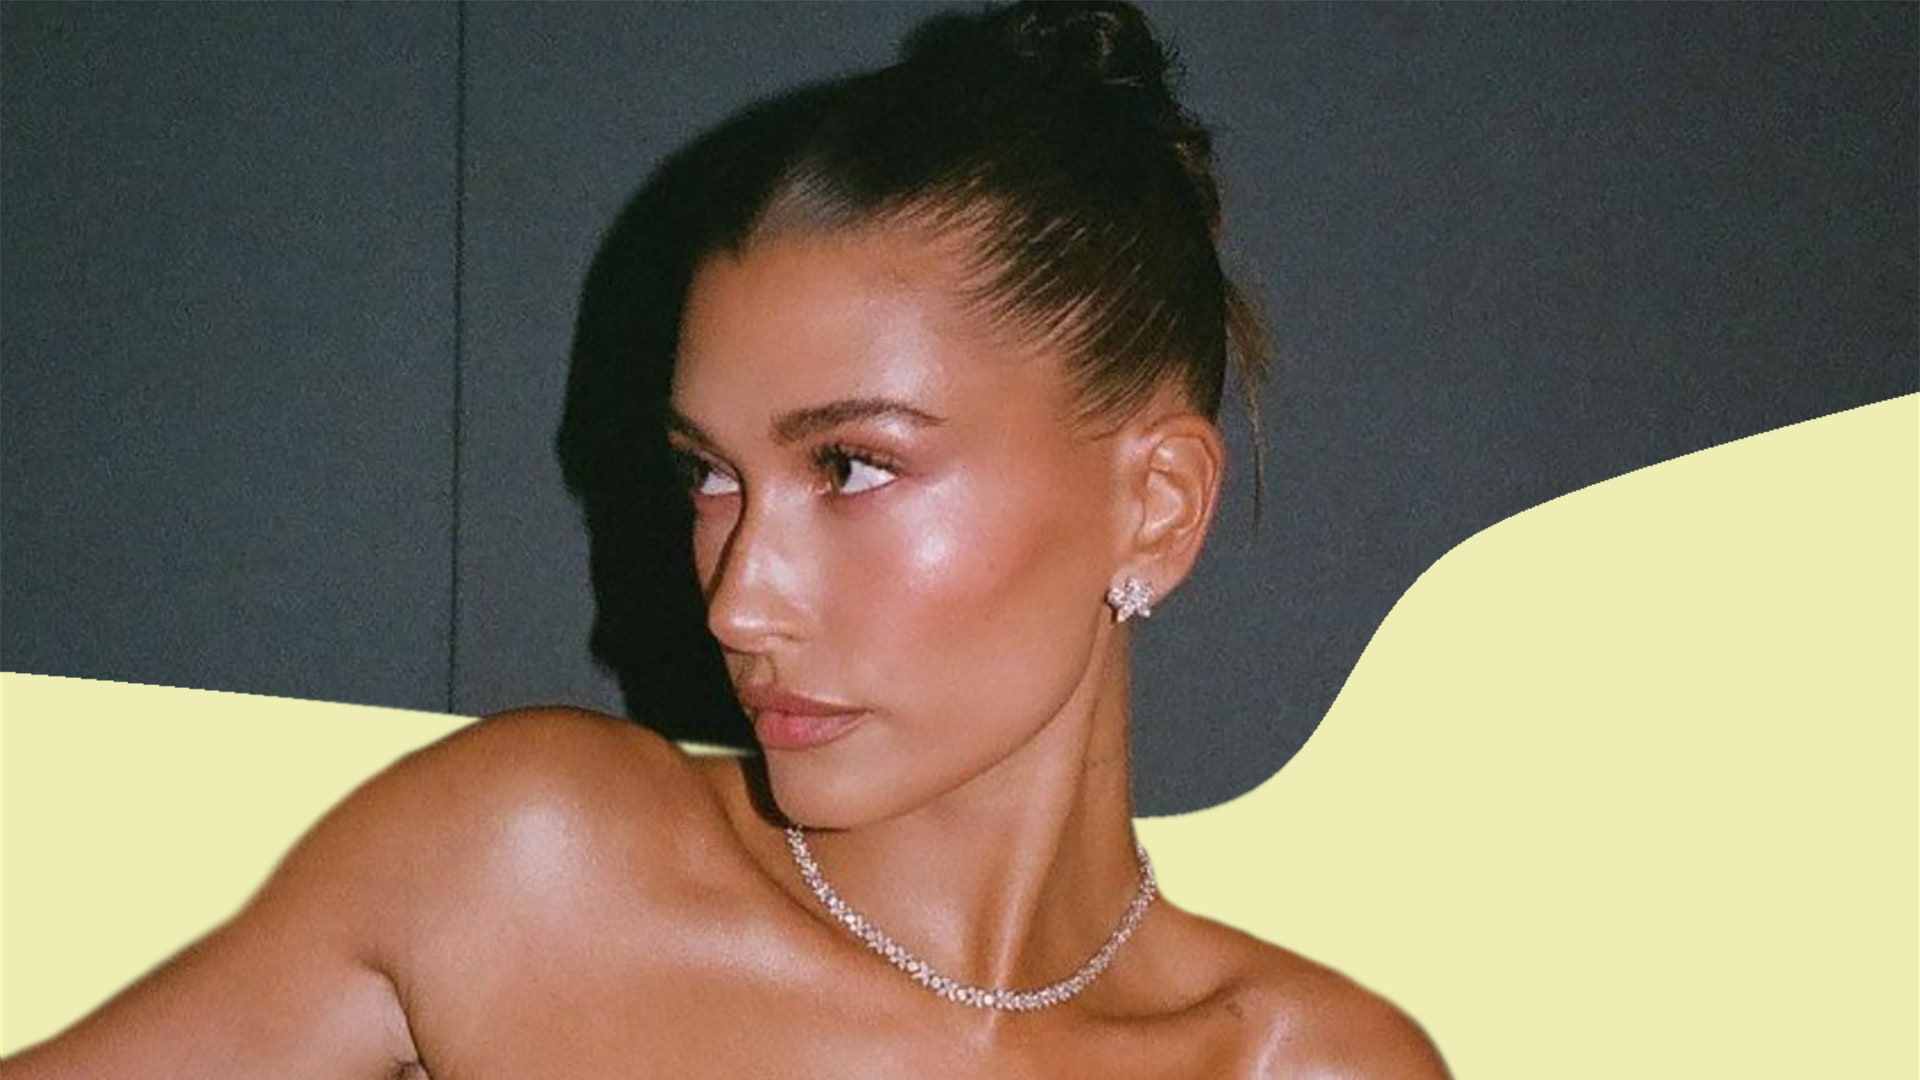 Hailey Bieber's Milky Black Nails Are the Perfect AntiGlazed Donut Manicure for Summer